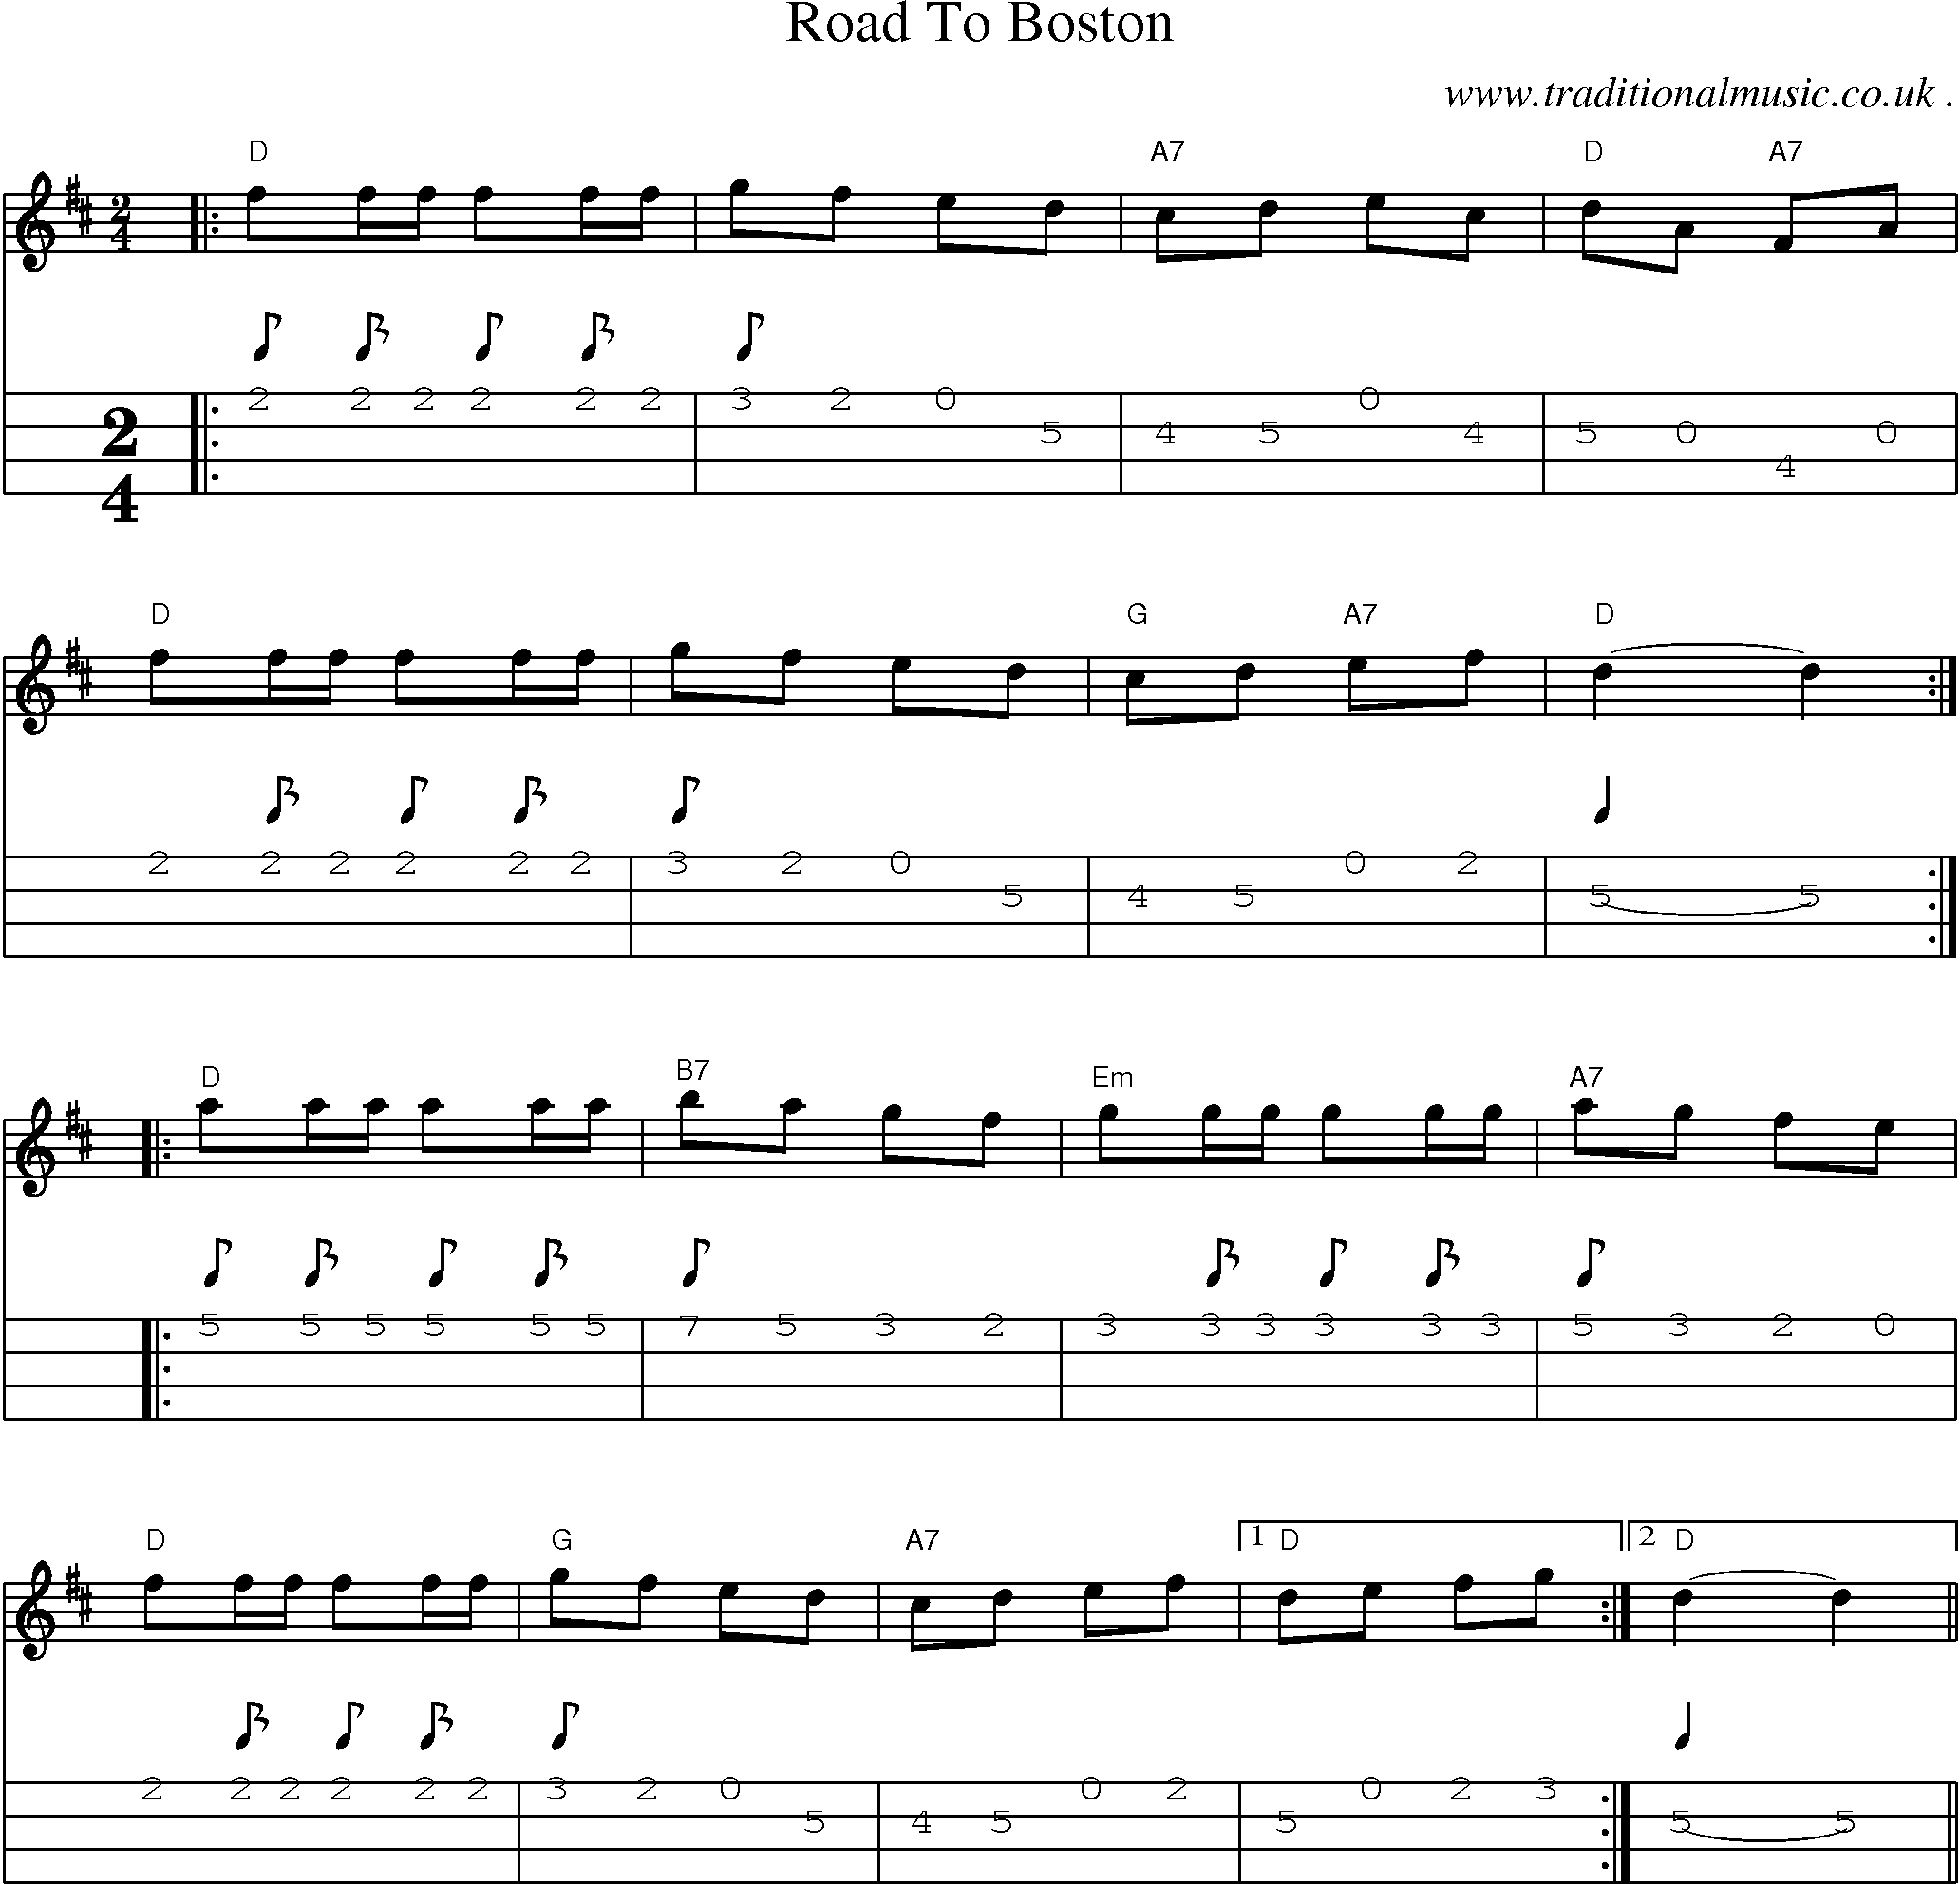 American Old-time music, Scores and Tabs for Mandolin - Road To Boston.